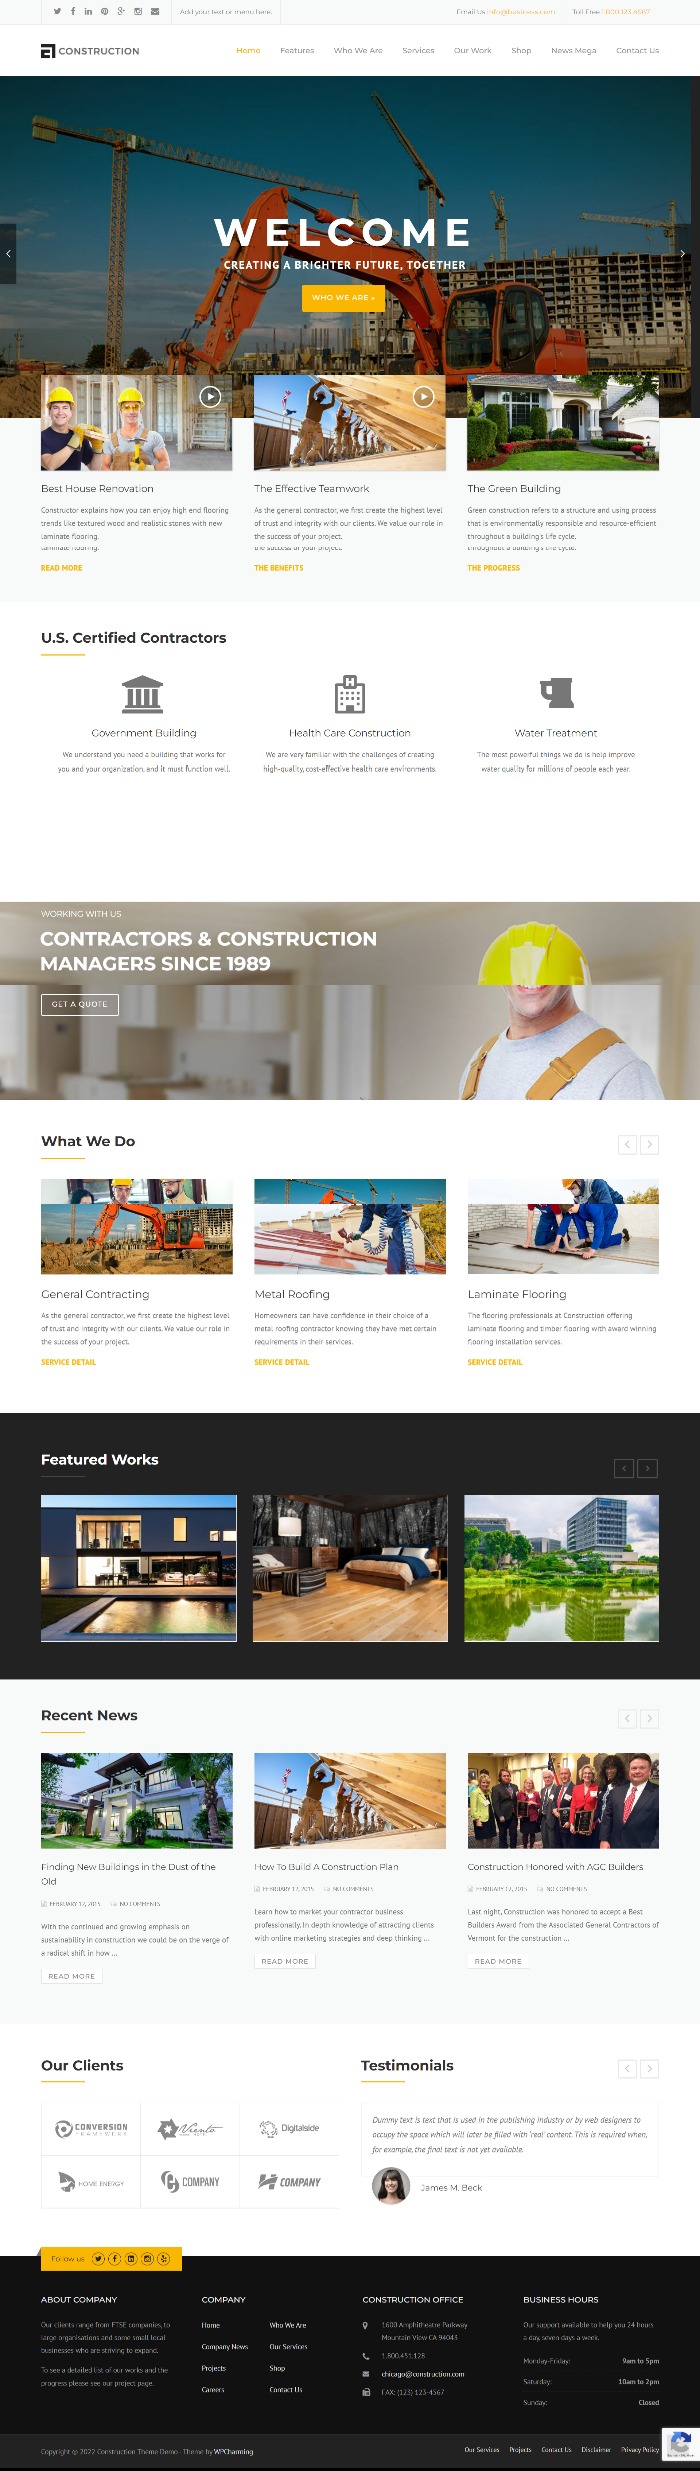 Mẫu Website Thiết Kế Xây Dựng - Construction